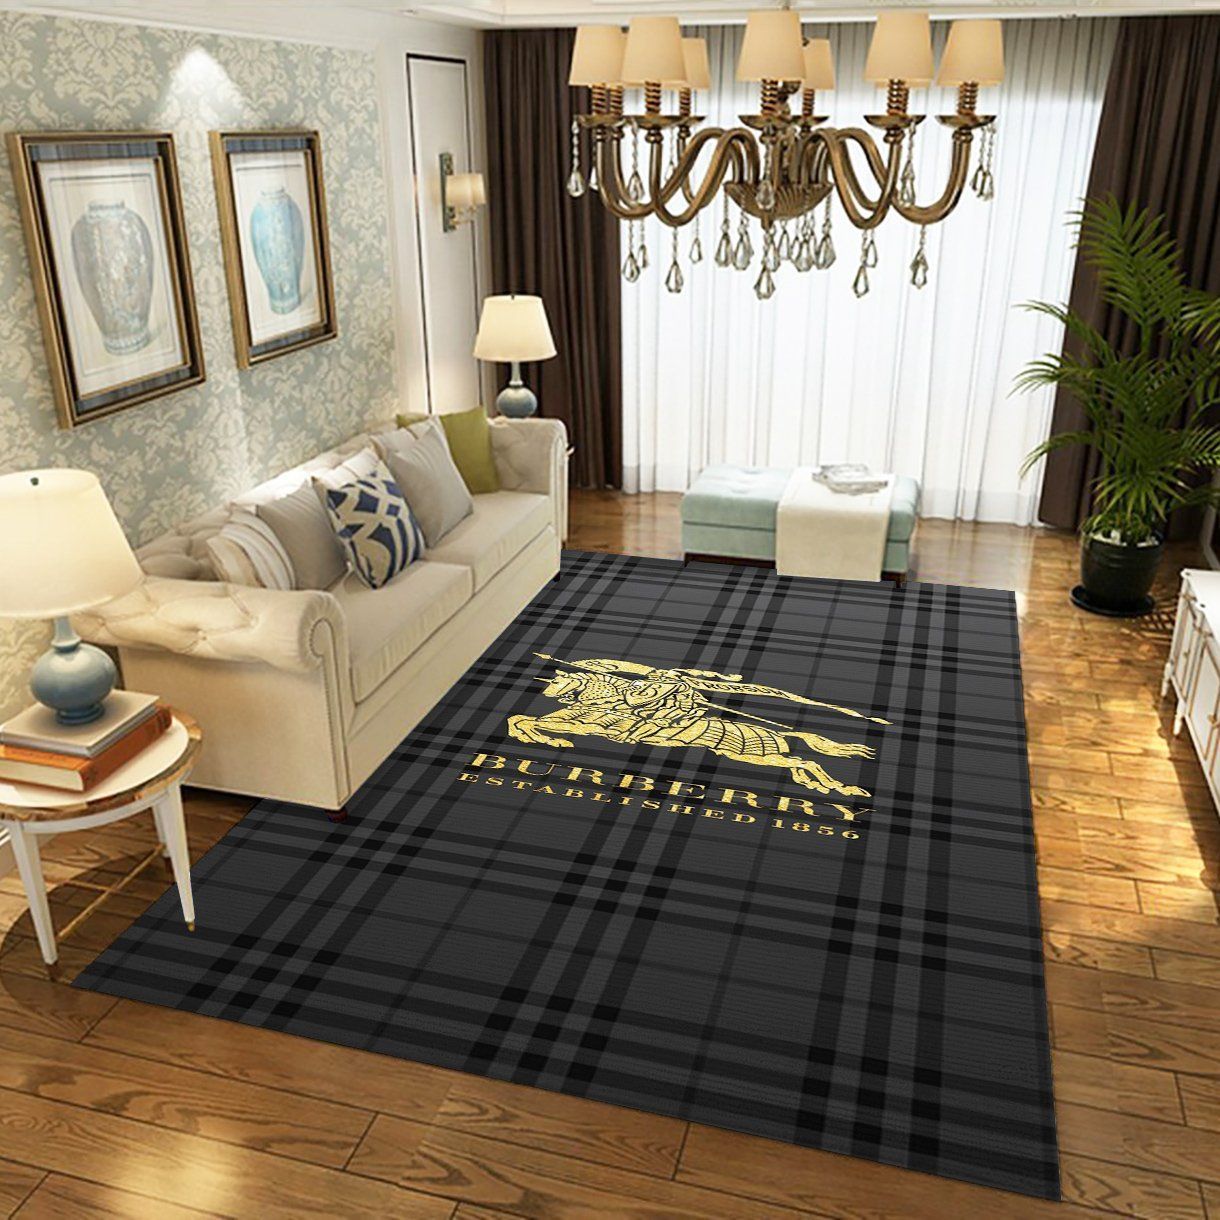 Burberry Luxury Brand 3 Area Rug Living Room And Bedroom Rug Us Gift Decor VH3